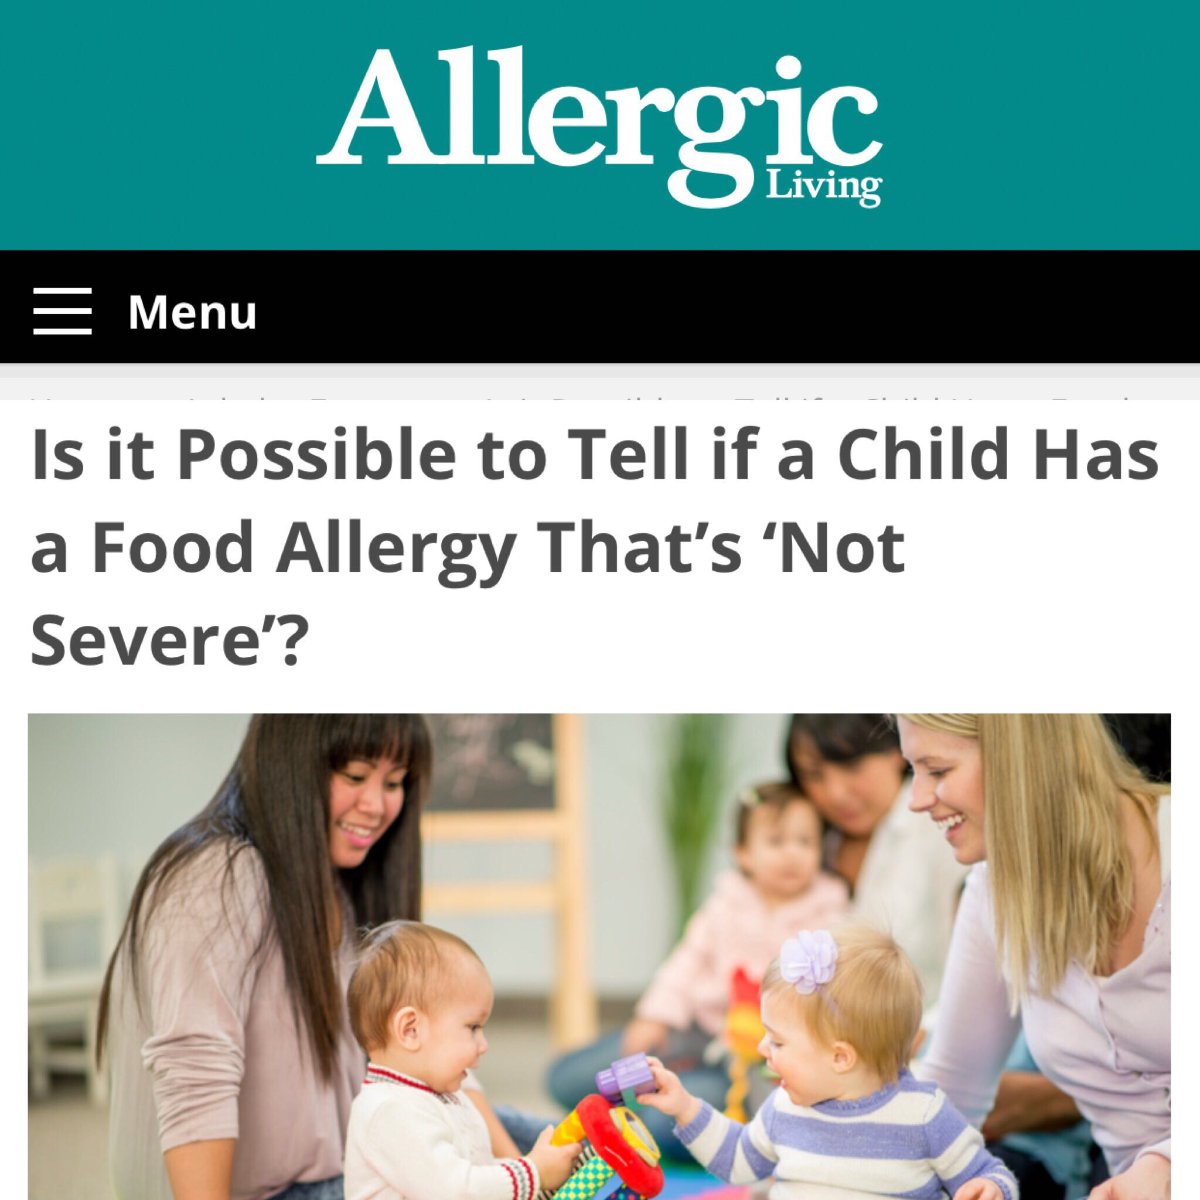 For those who believe an allergy is “not severe”: This point may be underscored by the fact that most people who have died because of food-allergic #anaphylaxis have had prior reactions, but they were rarely serious.
allergicliving.com/experts/is-it-… #foodallergies @AllergicLiving